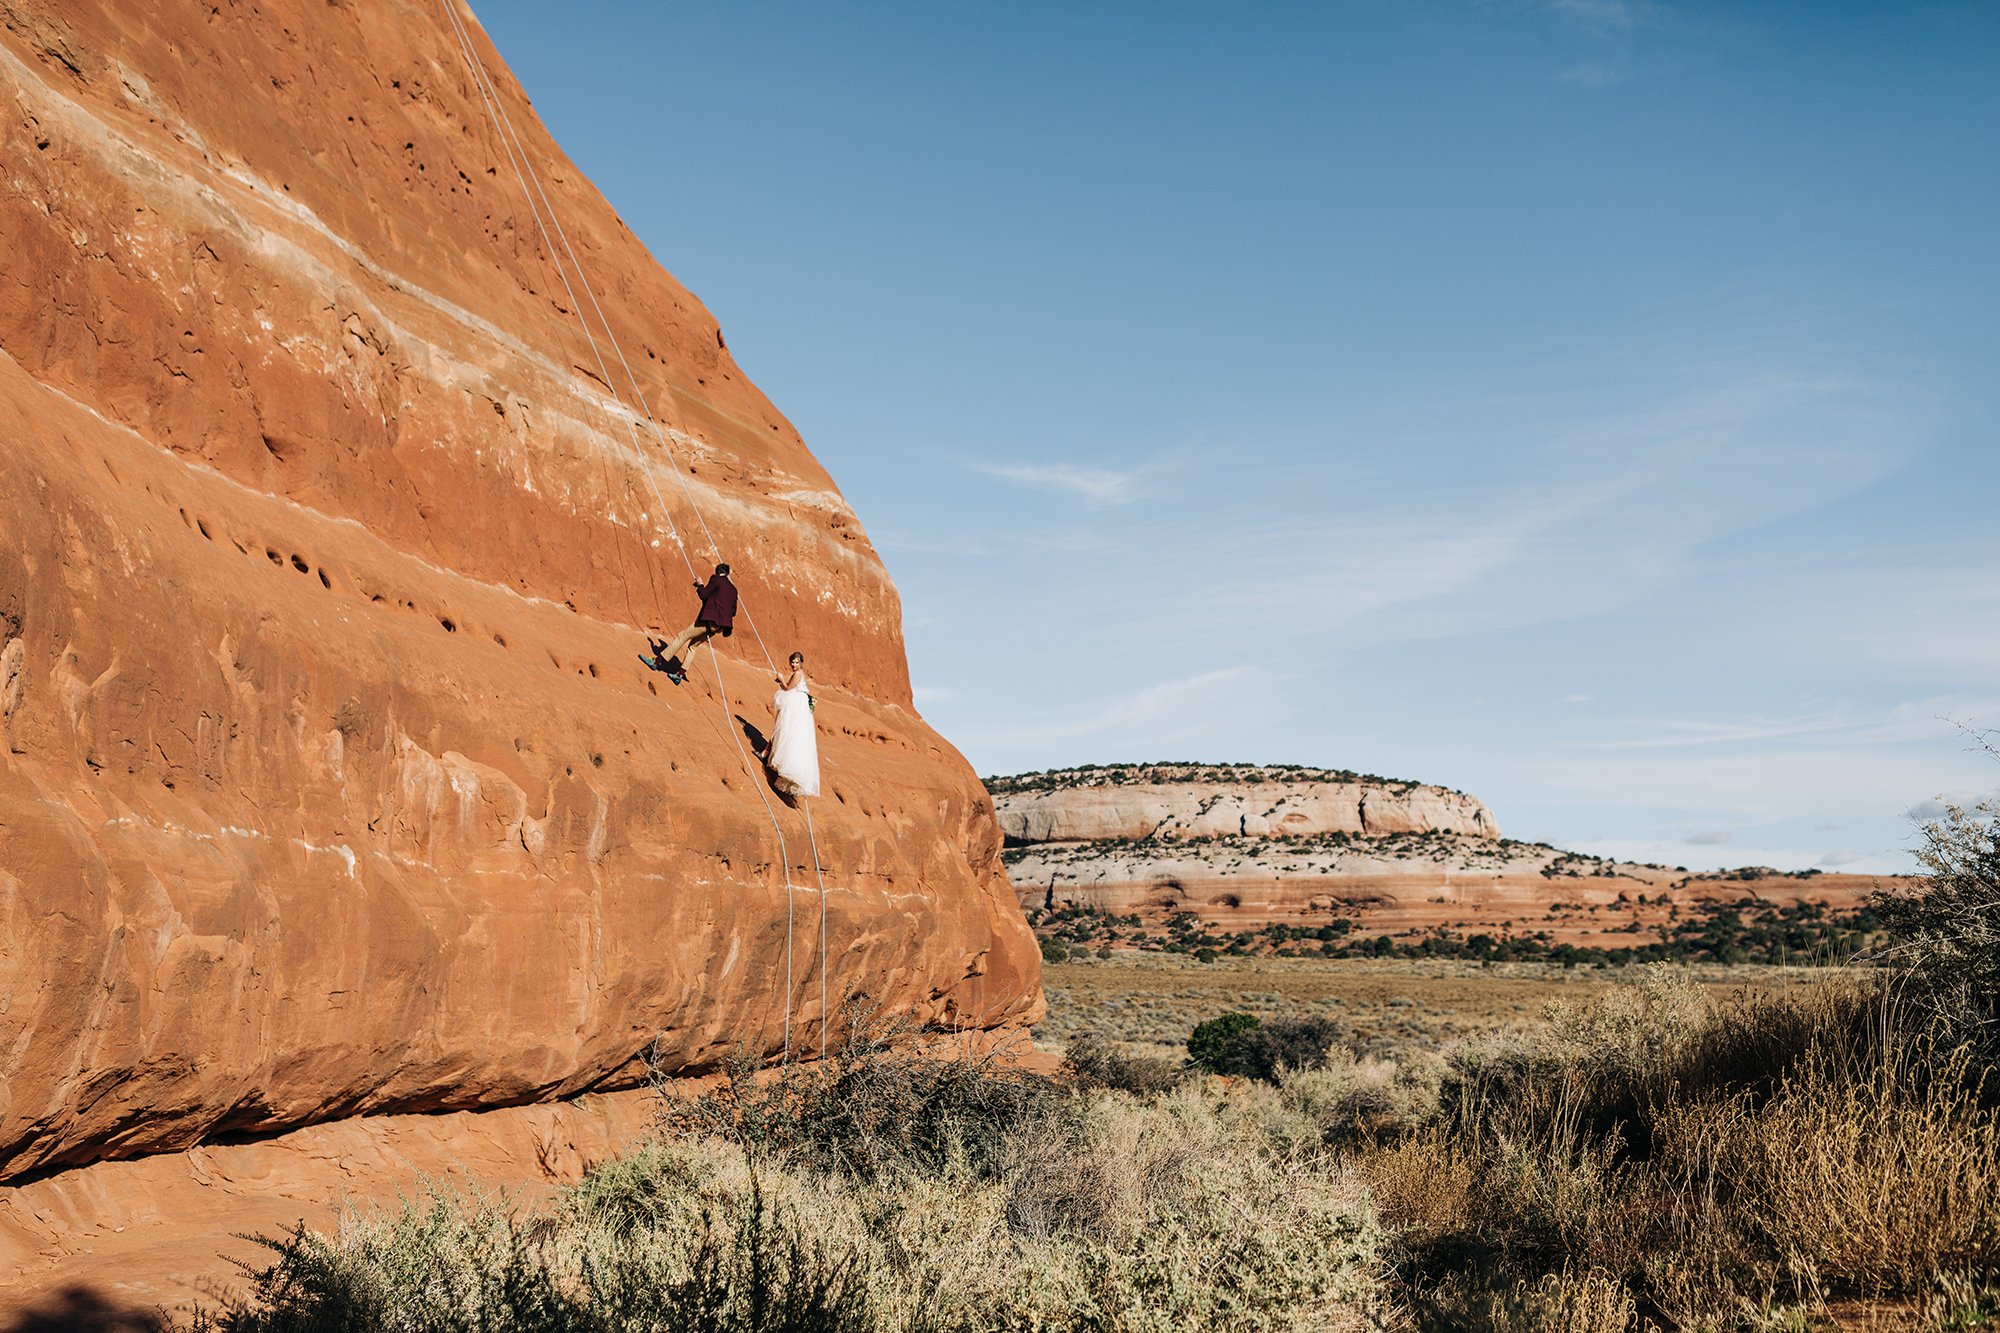 A couple climbs together with views of orange sandstone.